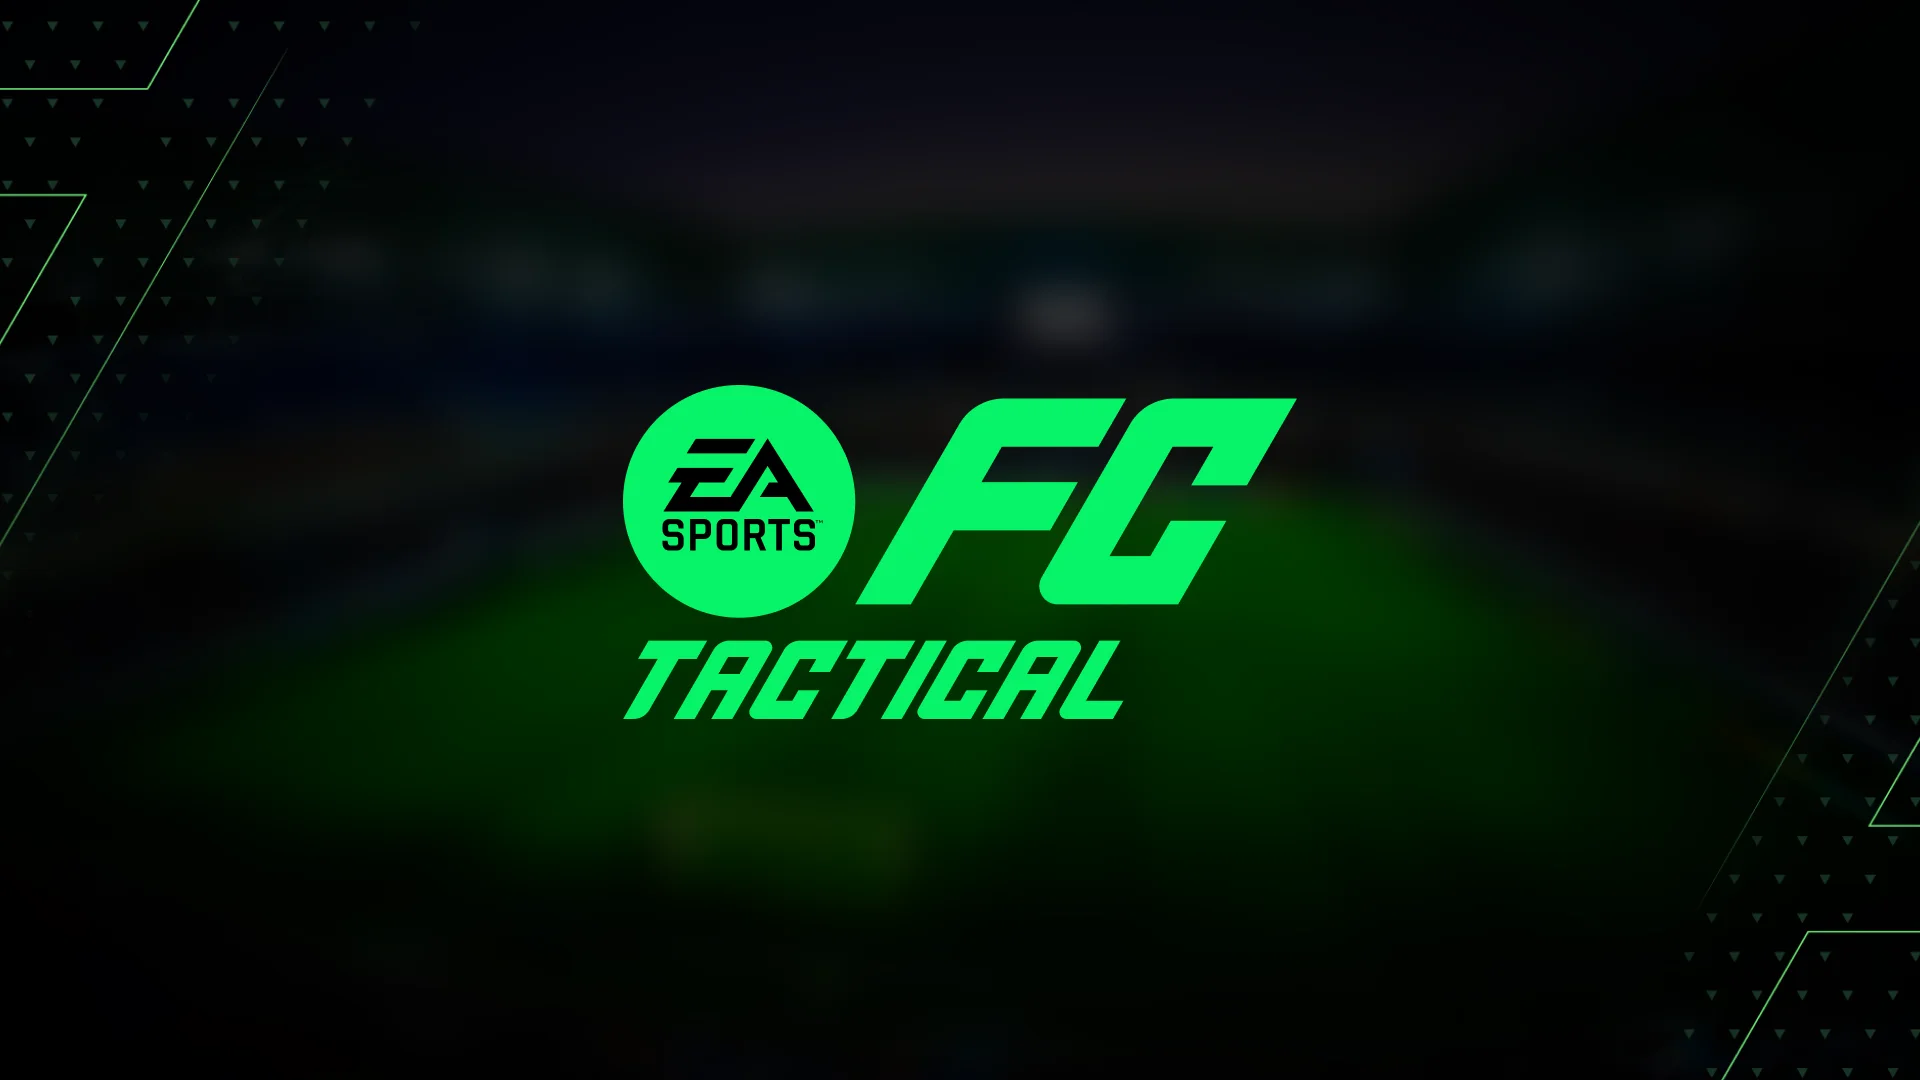 Electronic Arts presented the mobile game EA Sports FC Tactical